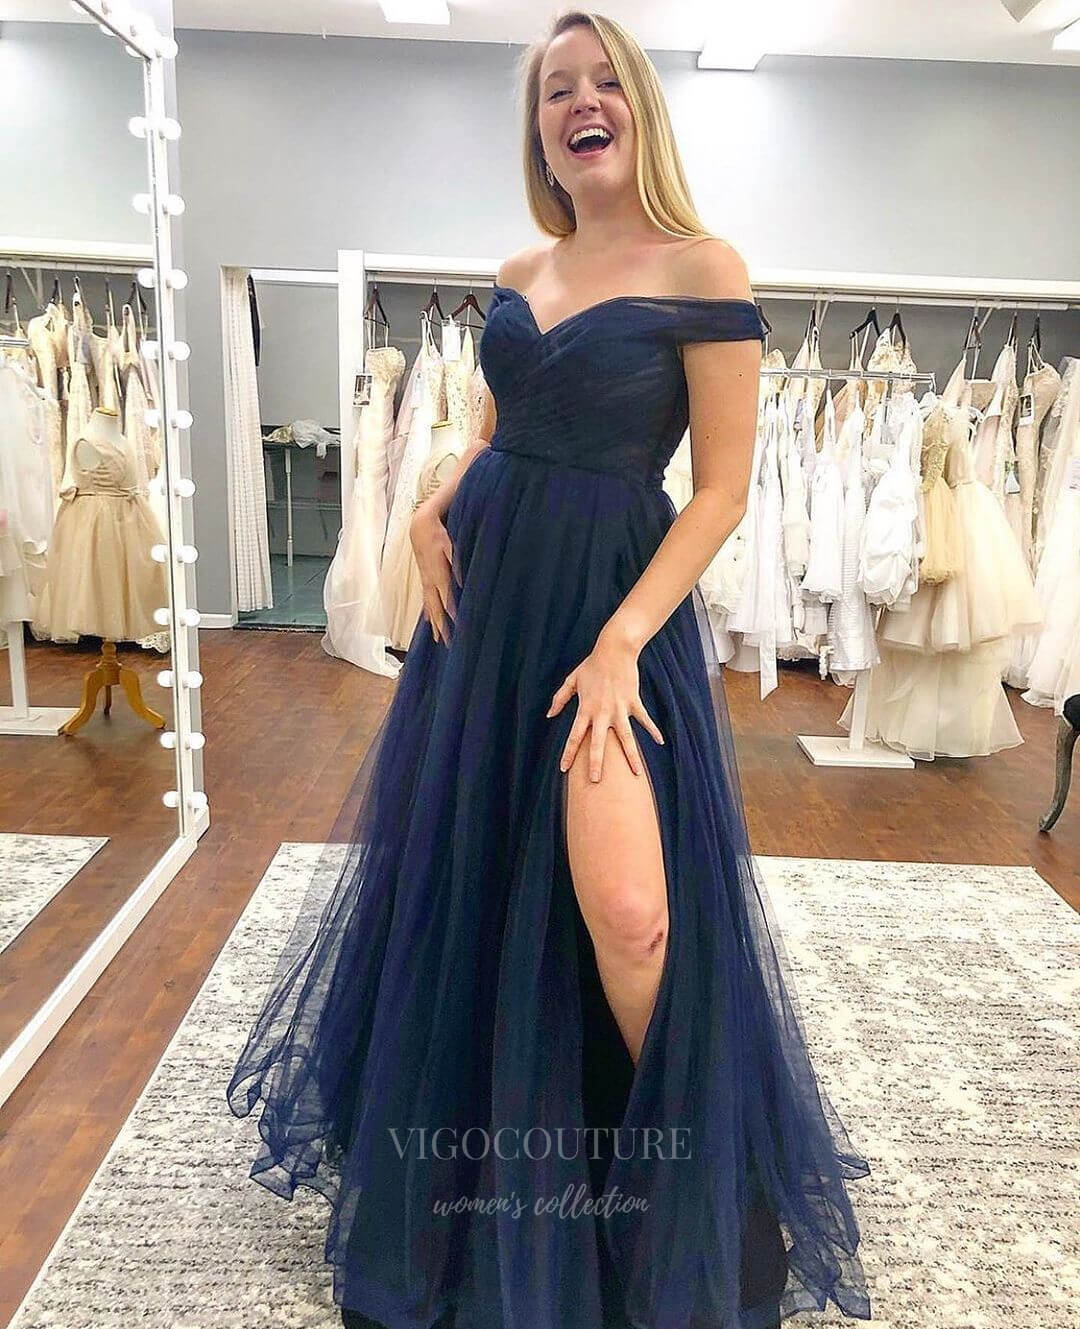 vigocouture-Navy Blue Tulle Off the Shoulder Prom Dress 20846-Prom Dresses-vigocouture-Navy Blue-US2-